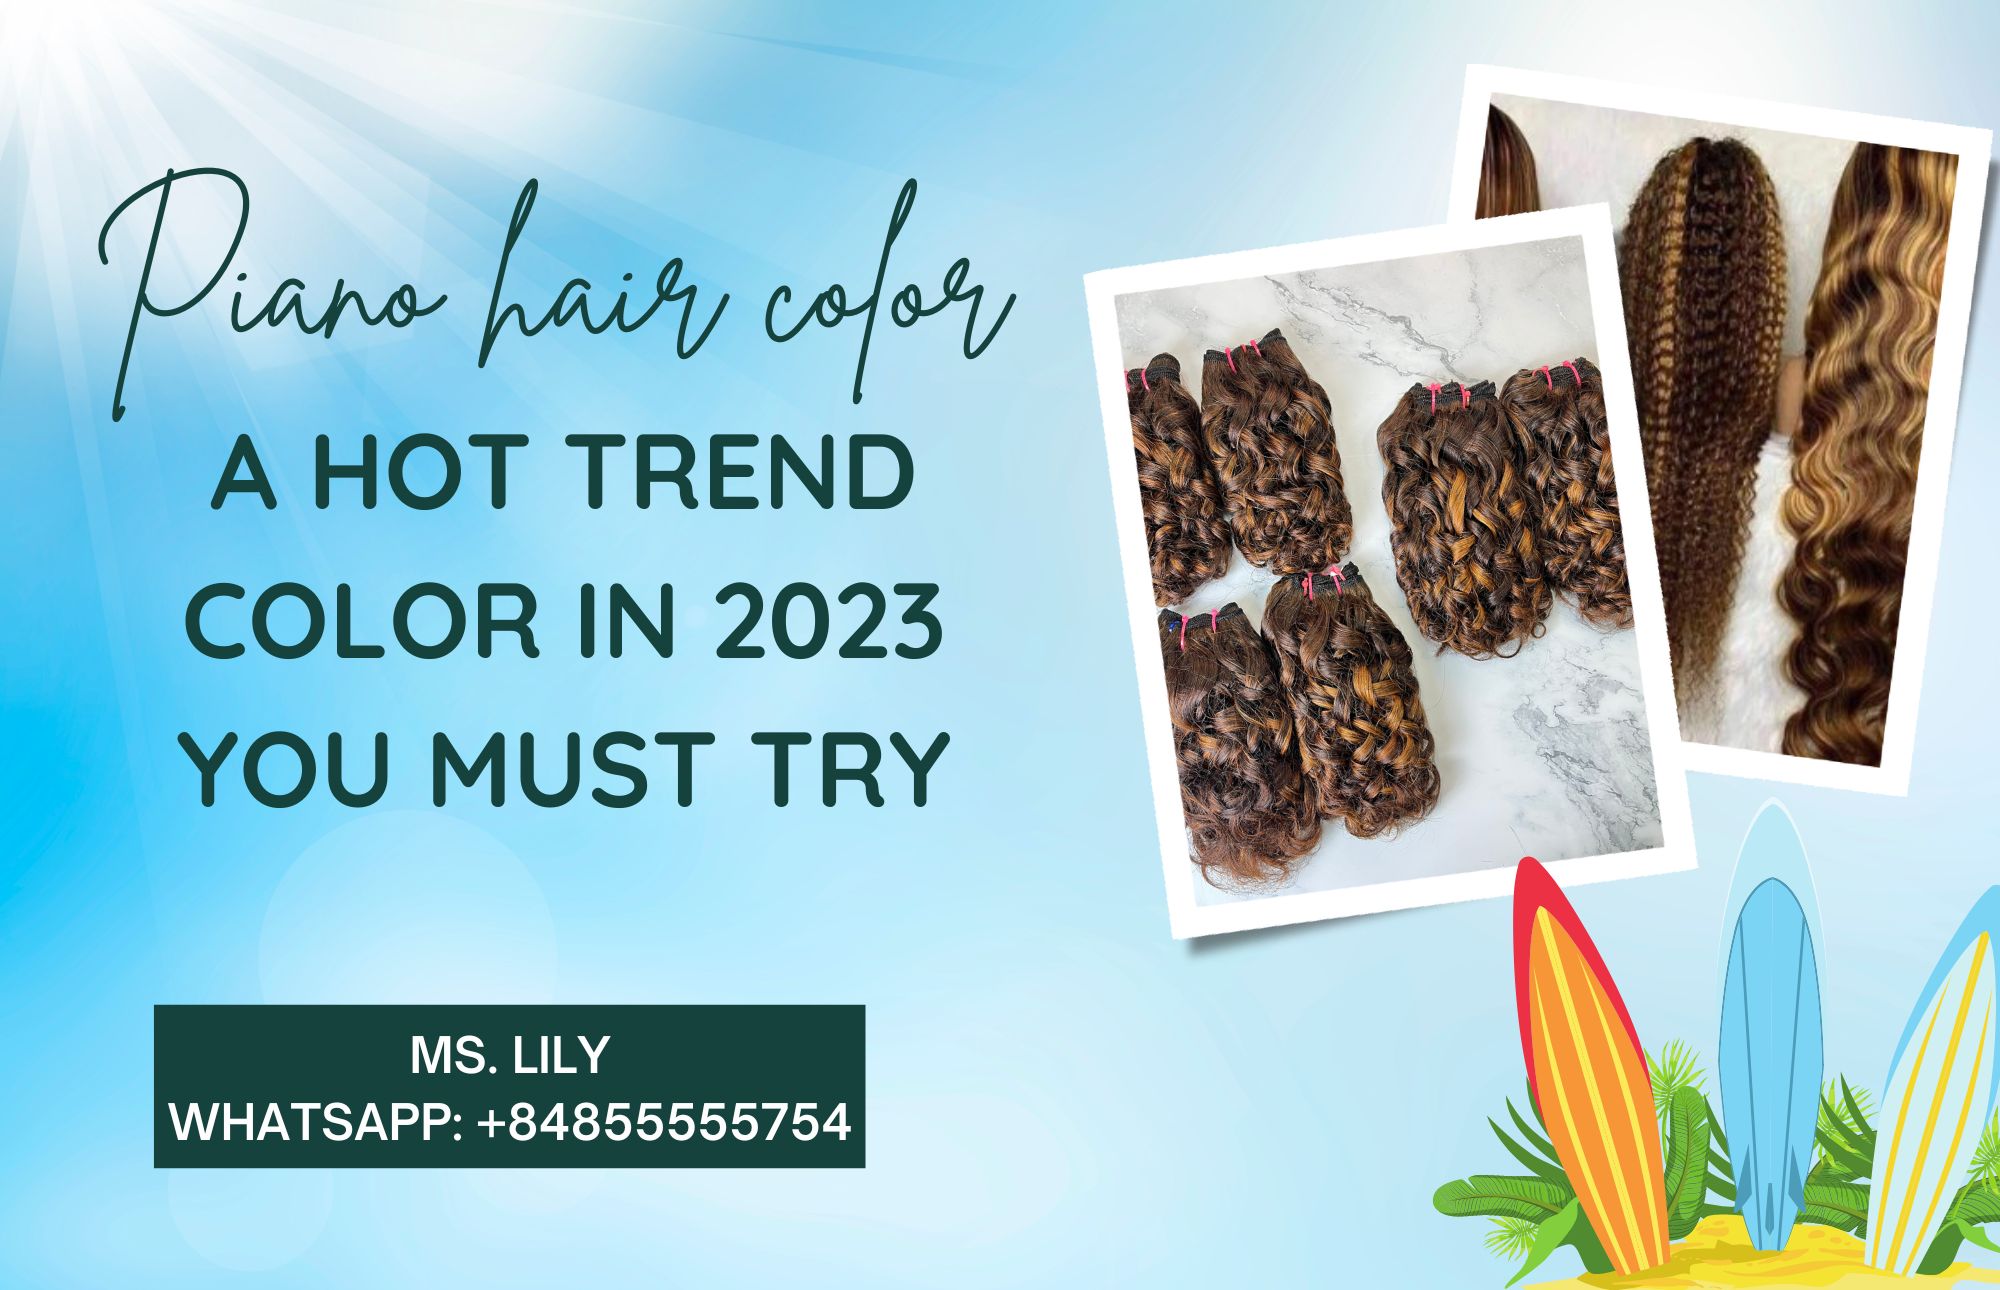 piano-hair-color-a-hot-trend-color-in-2023-you-must-try